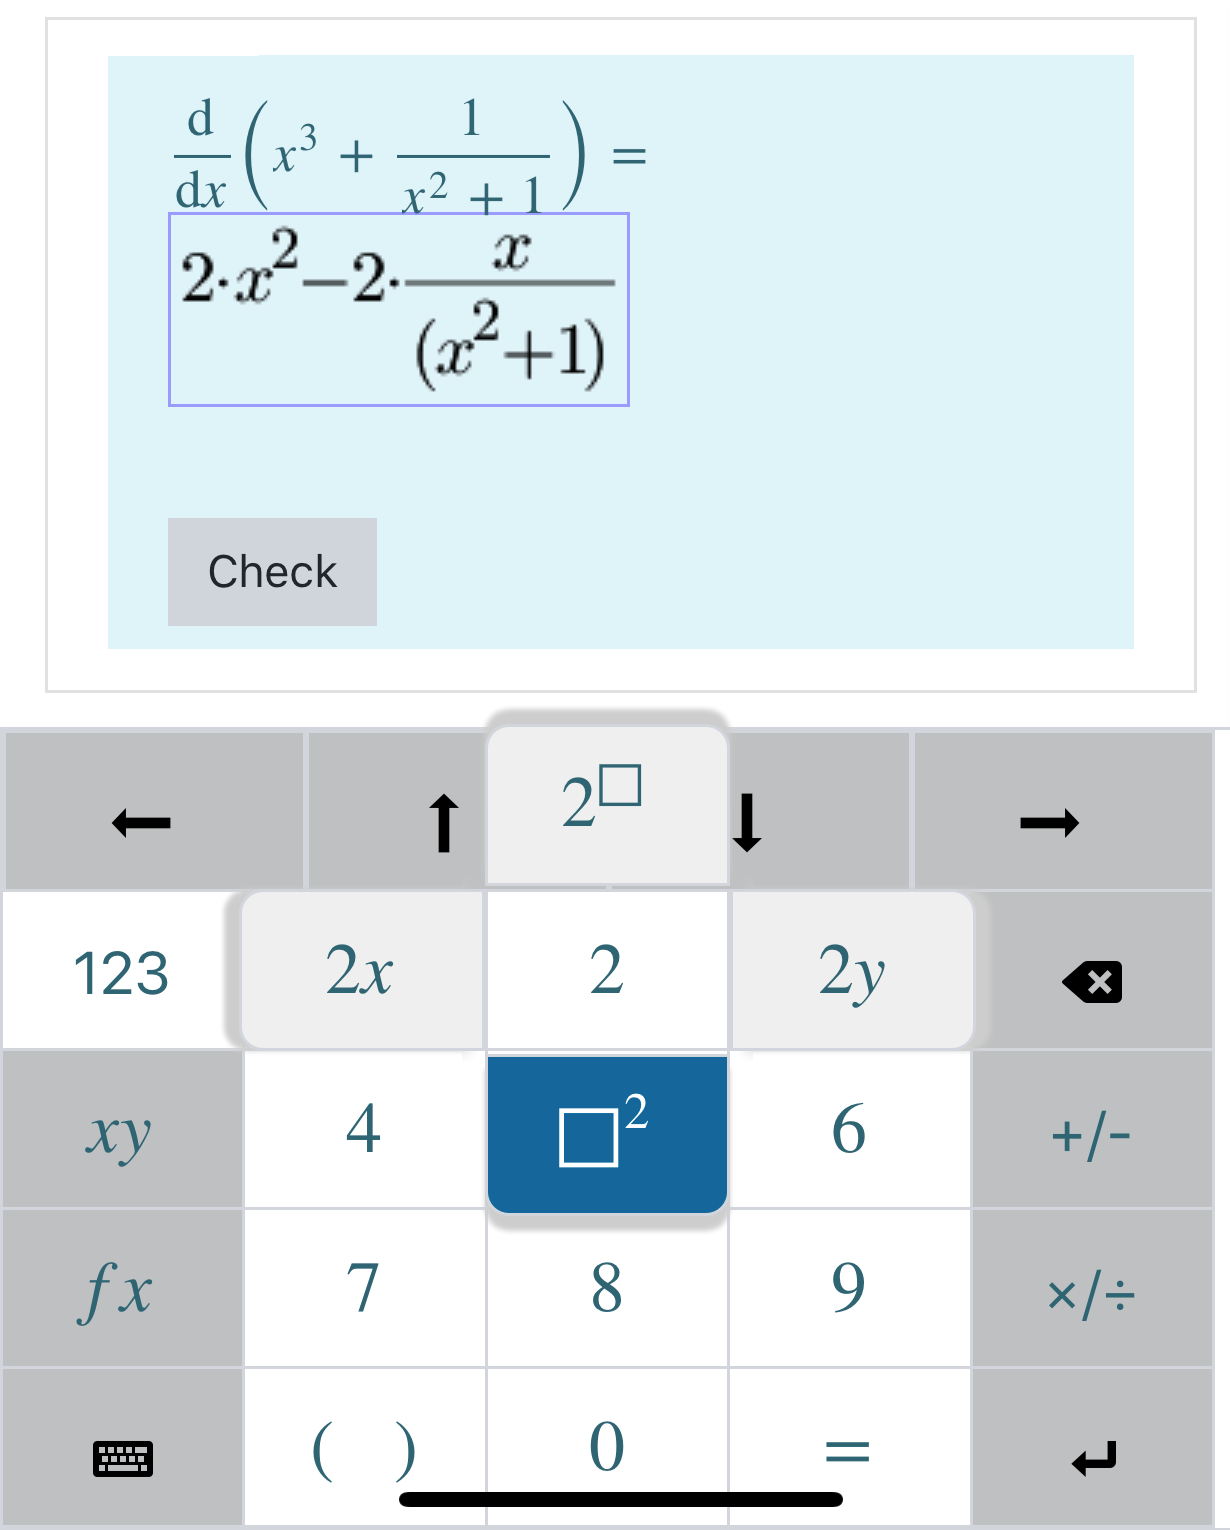 A STACK question is answered using a mobile keyboard. '2' is held down, displaying options for '2 to the power of', '2y', 'something to the power of 2' and '2x'.